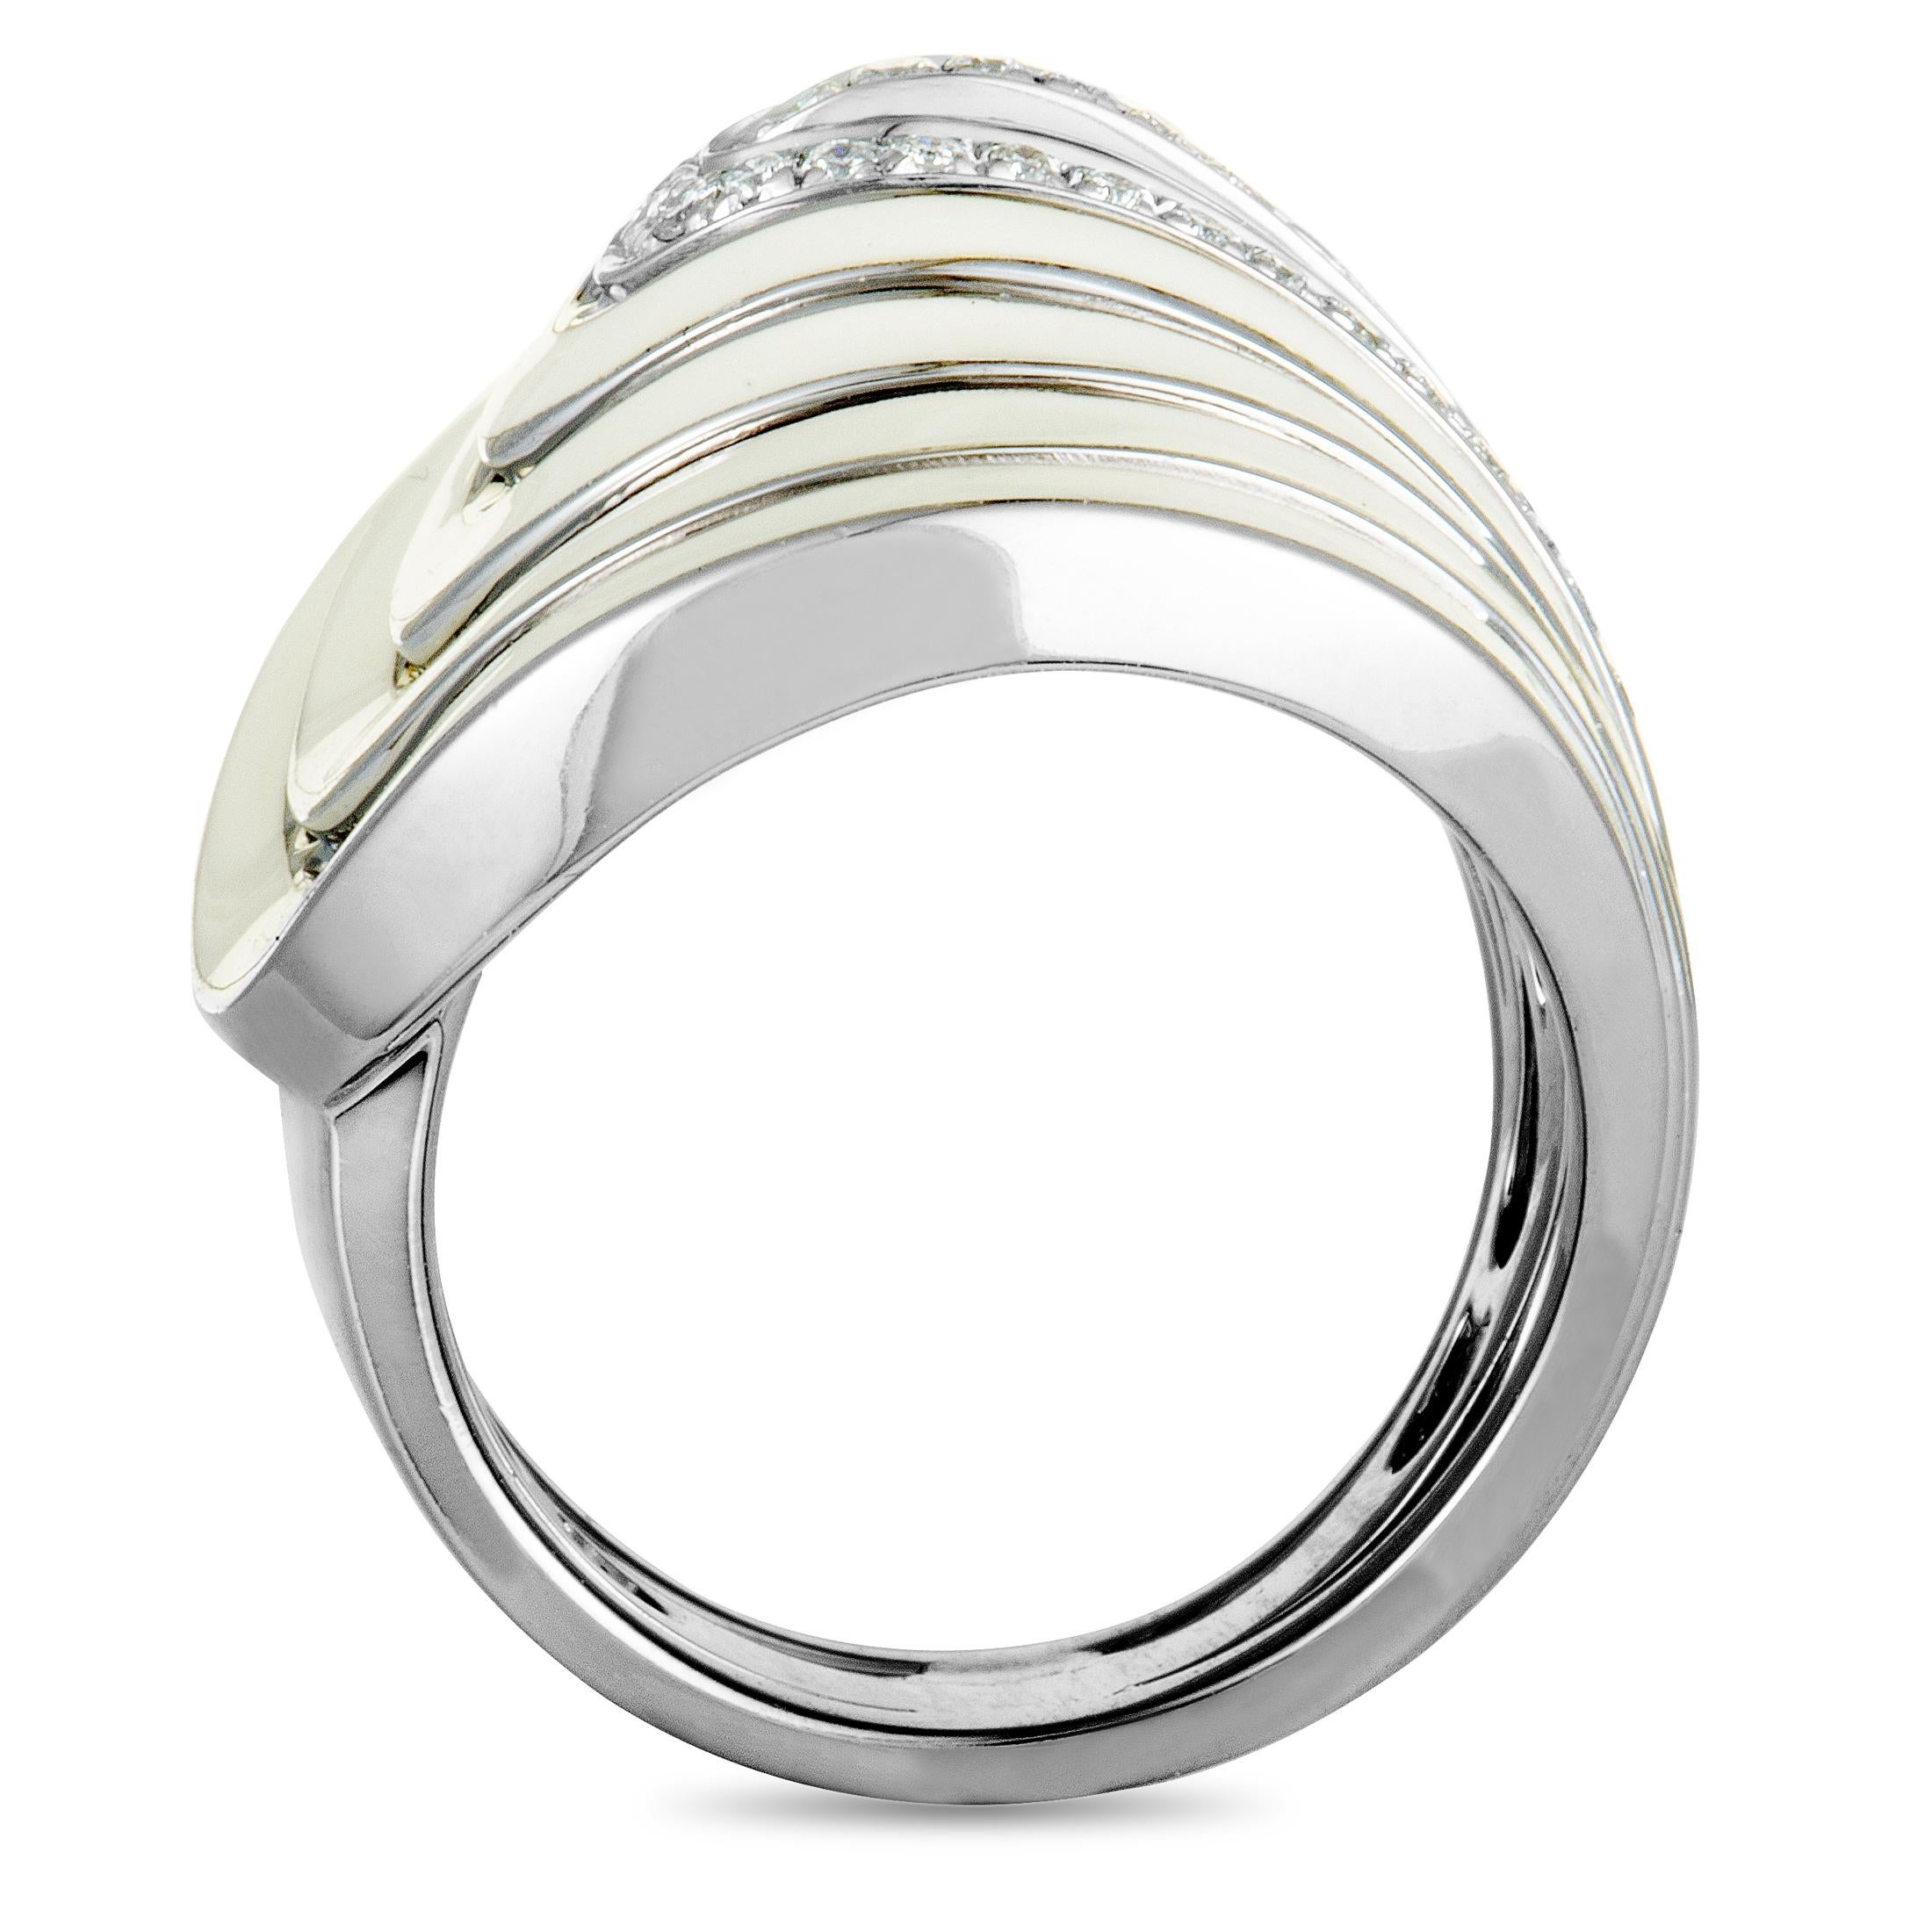 A compellingly luxurious effect is achieved in this majestic Roberto Coin ring by presenting an exceptionally attractive design in elegant 18K white gold and topping it off with sublime white enamel and with scintillating diamonds that weigh 0.22